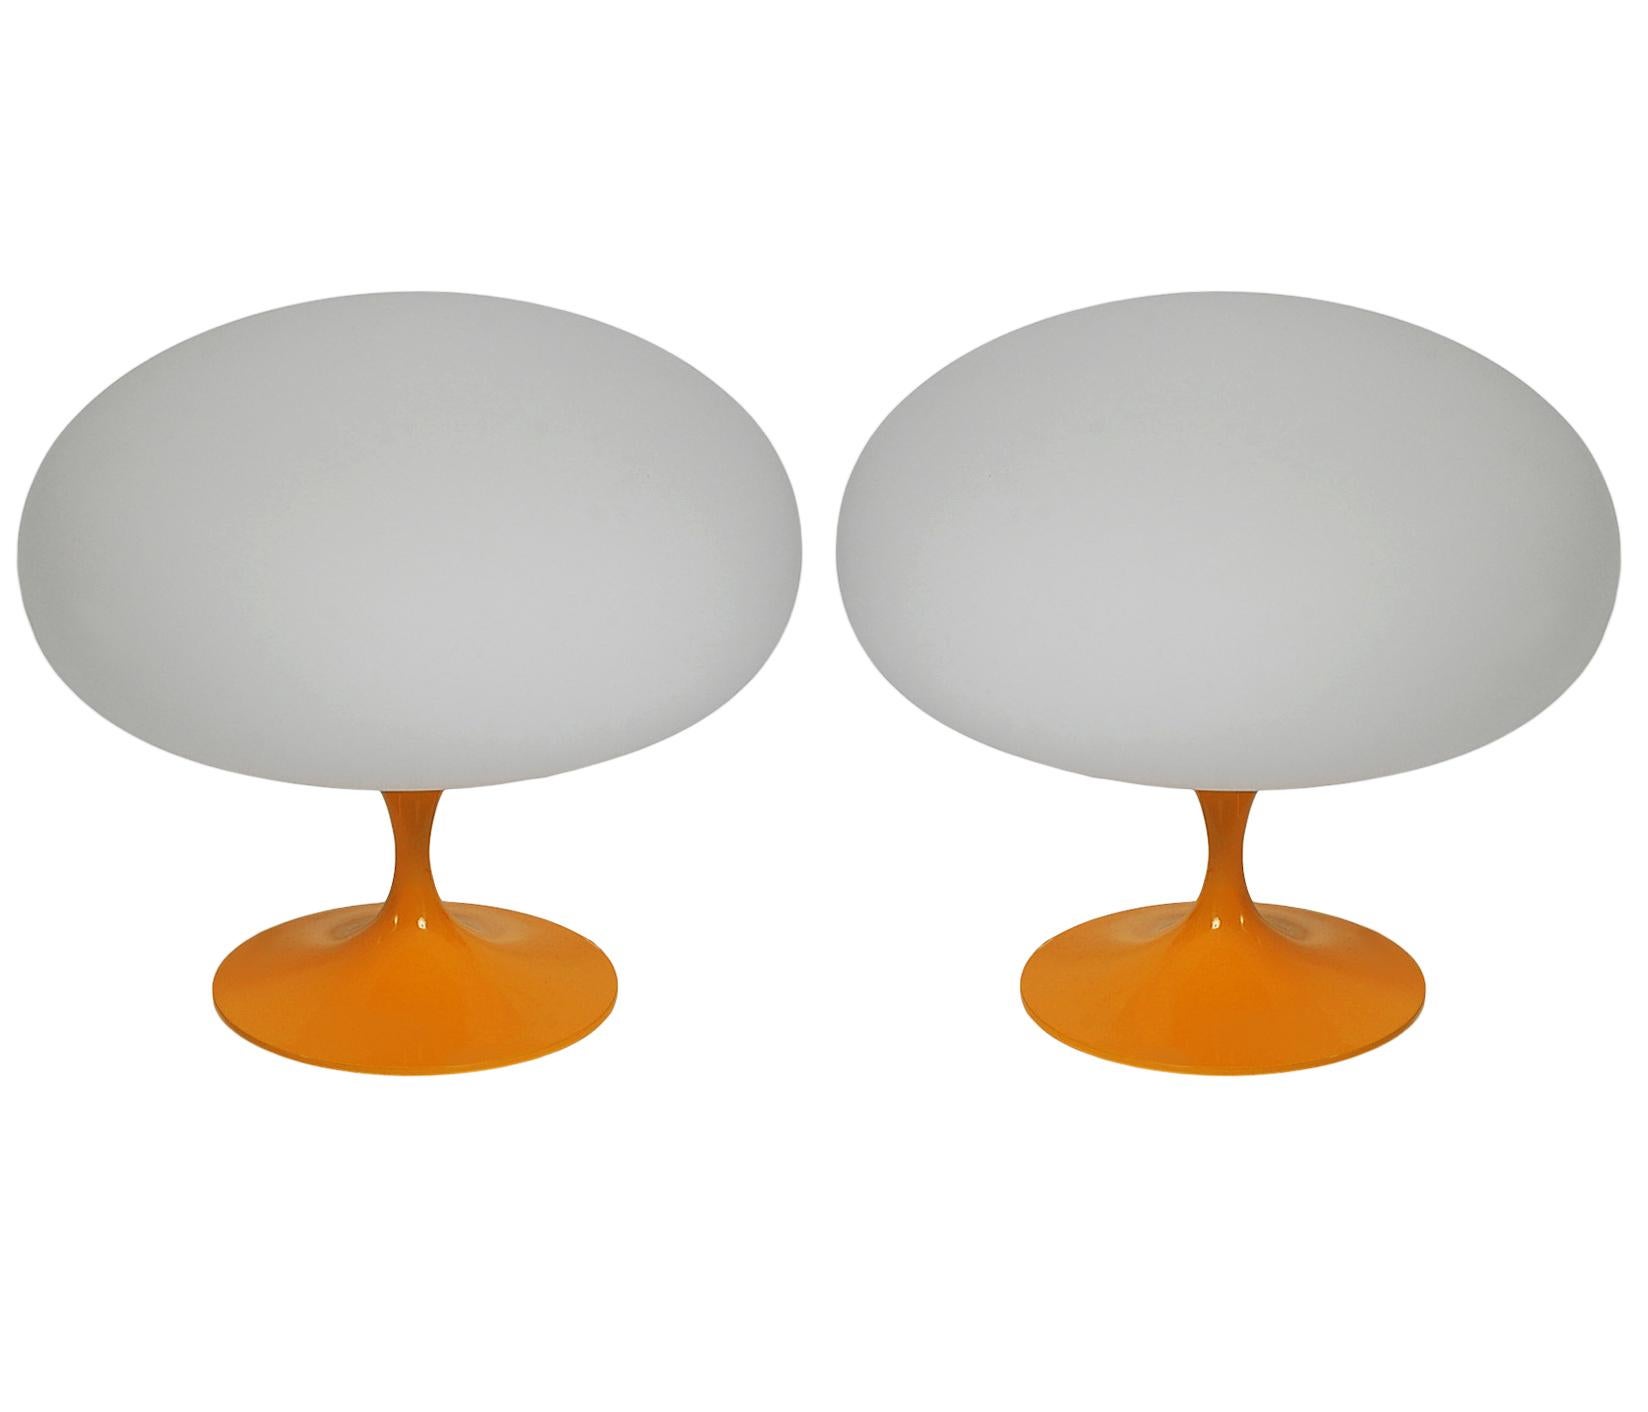 Contemporary Pair of Mid-Century Tulip Table Lamps by Designline in Orange on White Glass For Sale